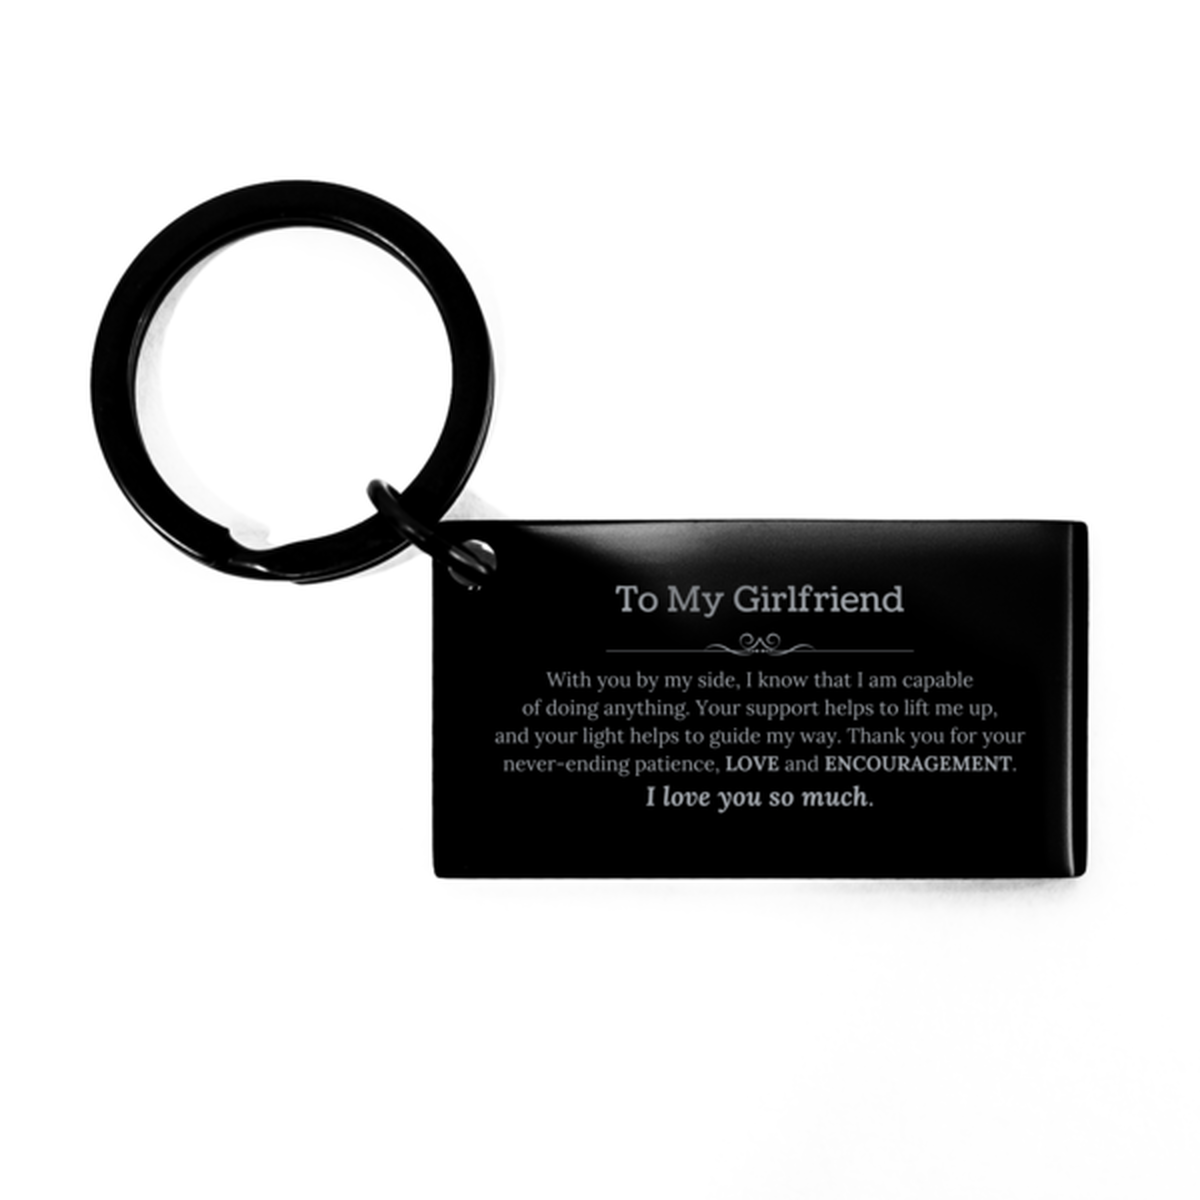 Appreciation Girlfriend Keychain Gifts, To My Girlfriend Birthday Christmas Wedding Keepsake Gifts for Girlfriend With you by my side, I know that I am capable of doing anything. I love you so much